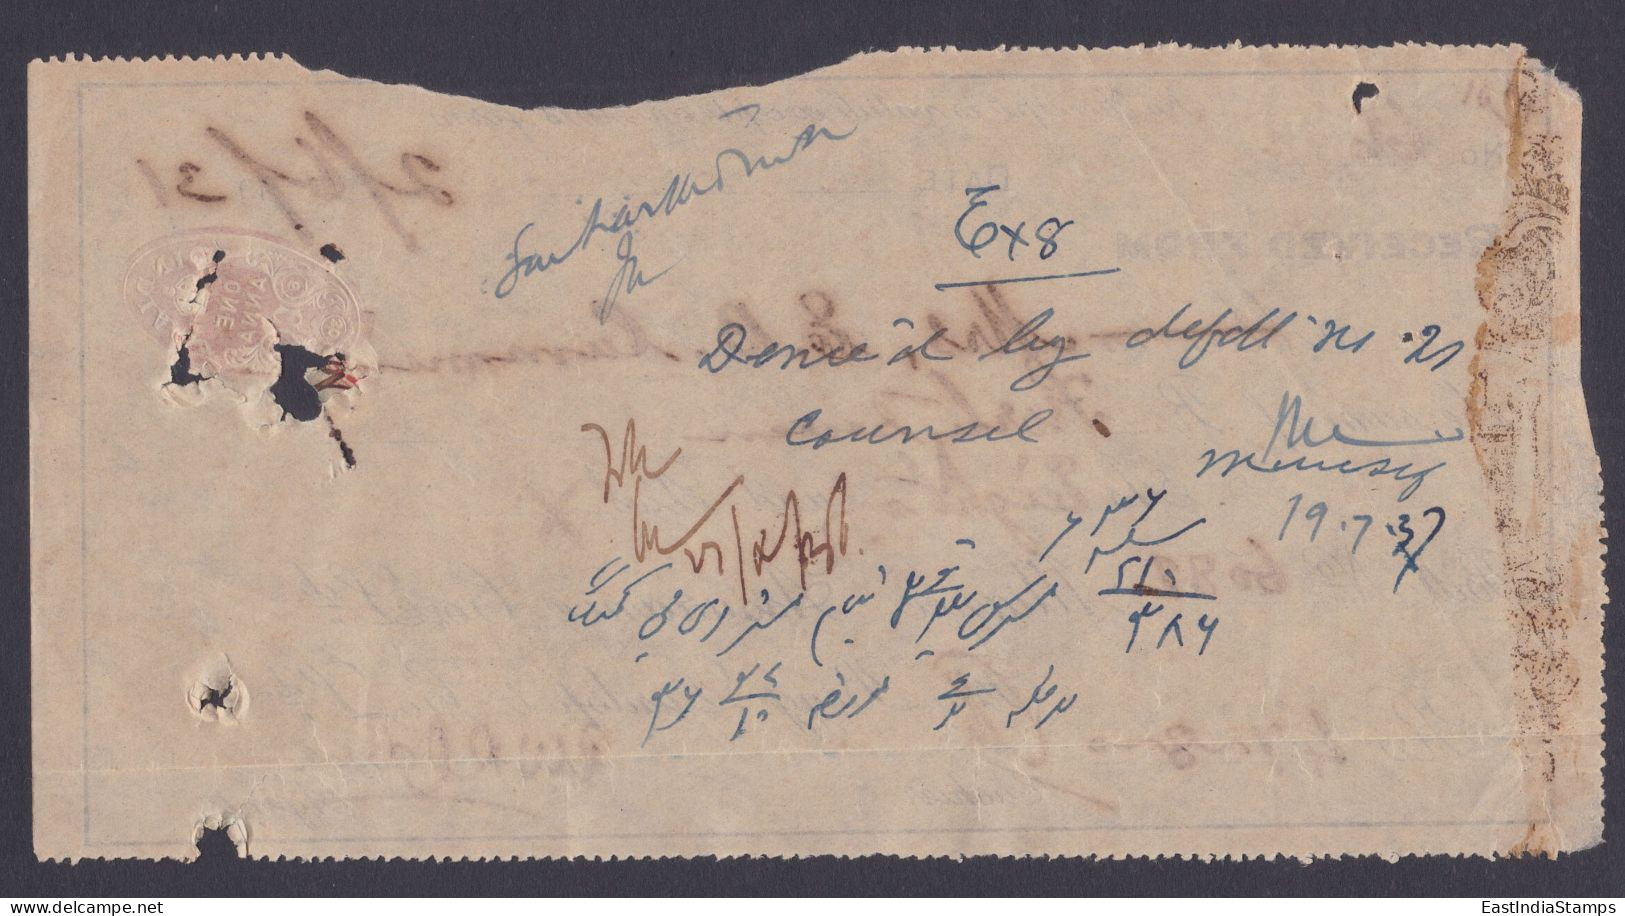 Inde British India 1931 One Anna Receipt, Alliance Assurance Company Limited, Insurance, Begg Dunlop - 1911-35 Roi Georges V